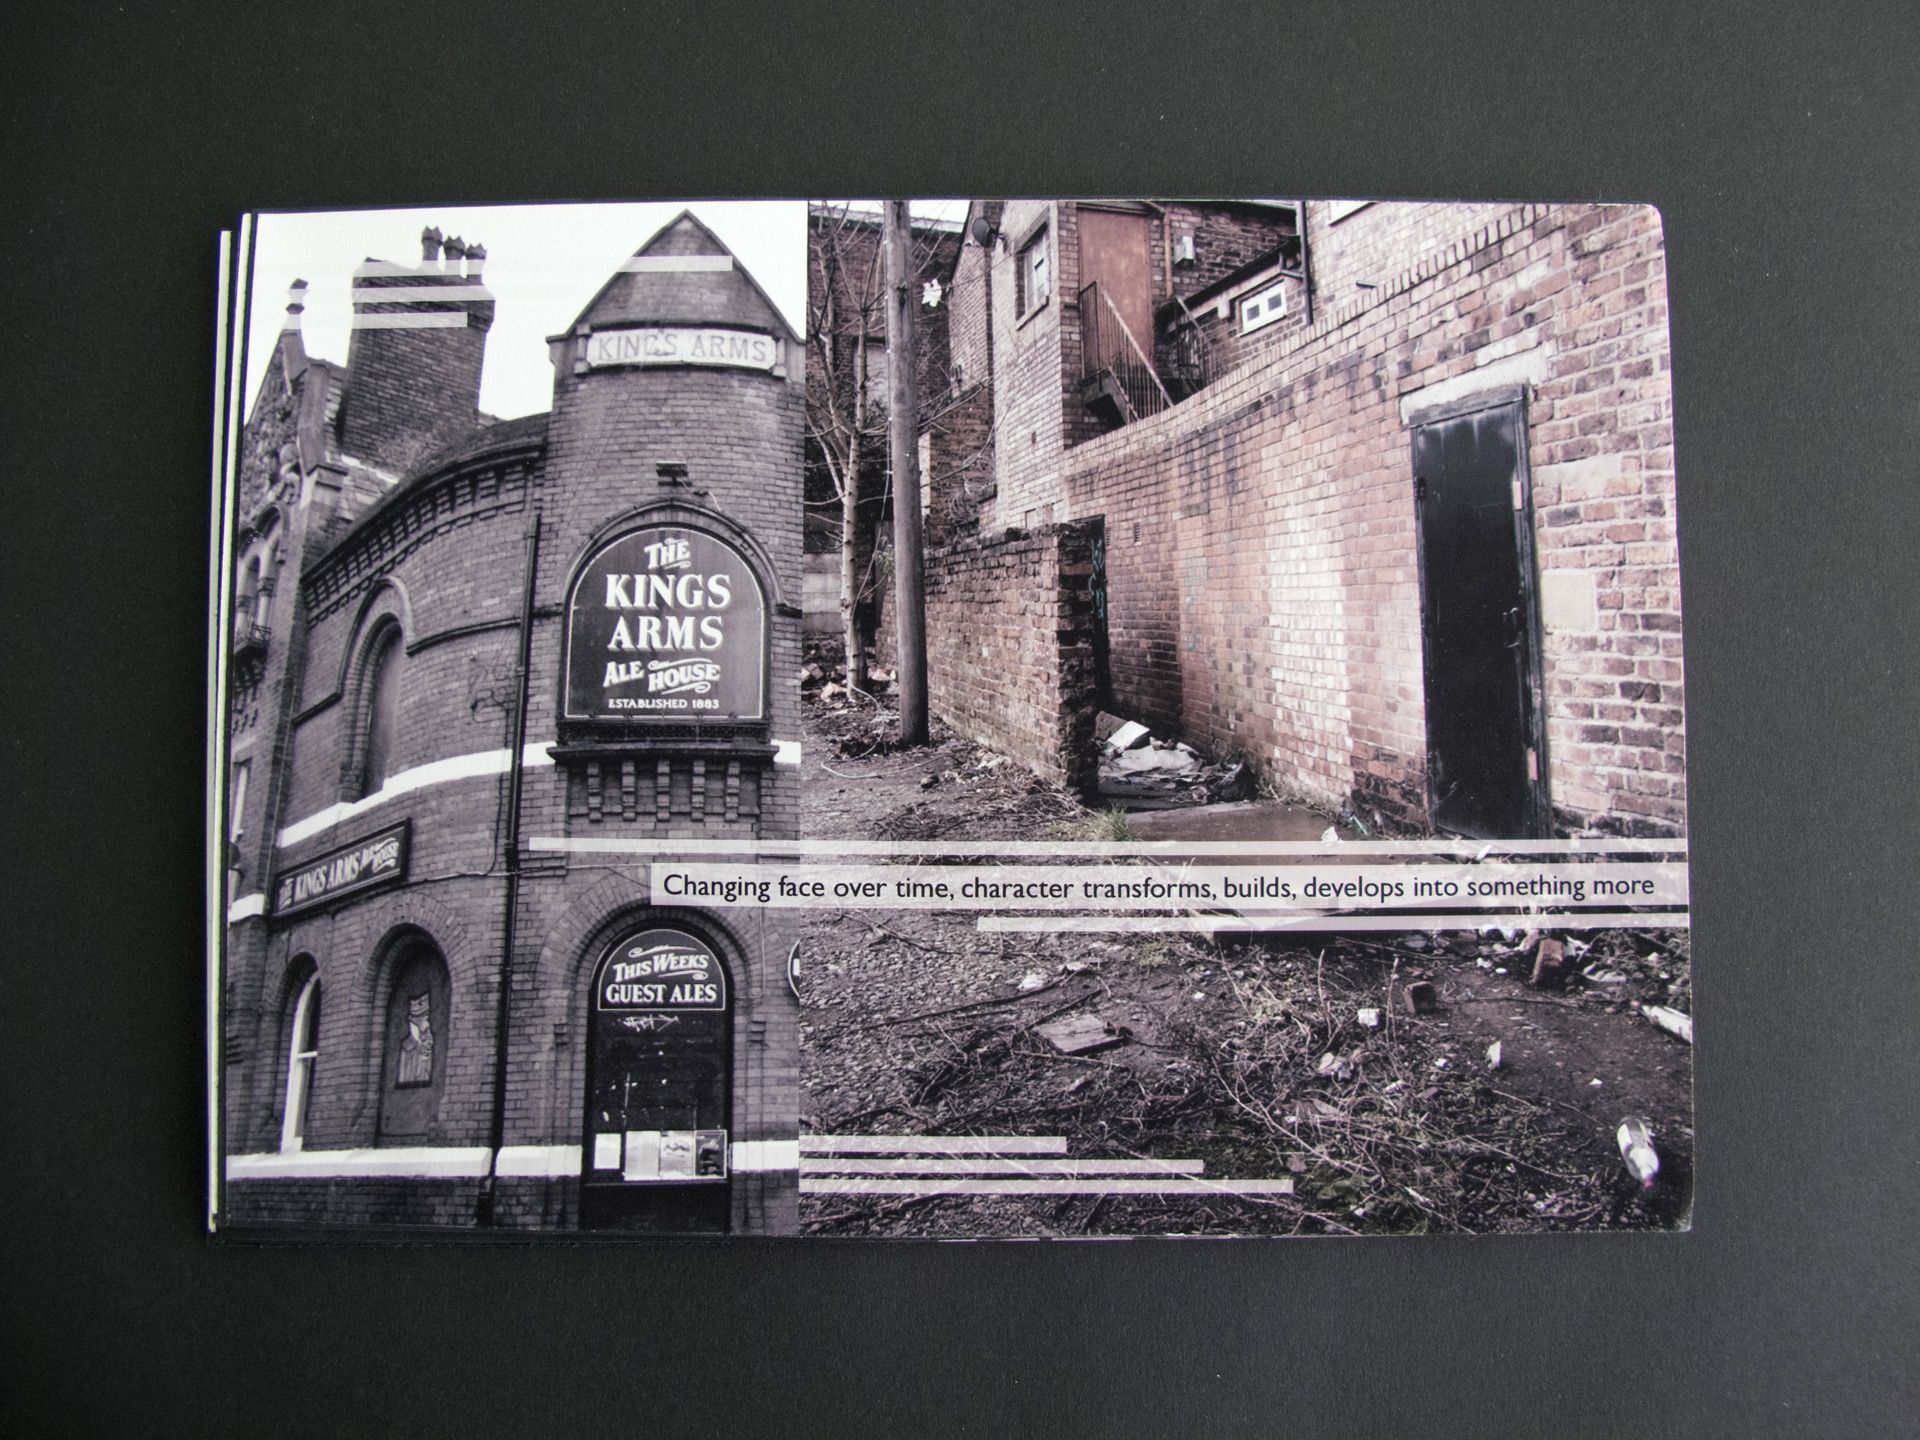 The booklet's back cover features two desaturated photographs. The left image shows The Kings Arms pub while the right one depicts an alley with litter and debris. The page also includes the words 'Changing face over time, character transforms, builds, develops into something more' overlaid on the images.